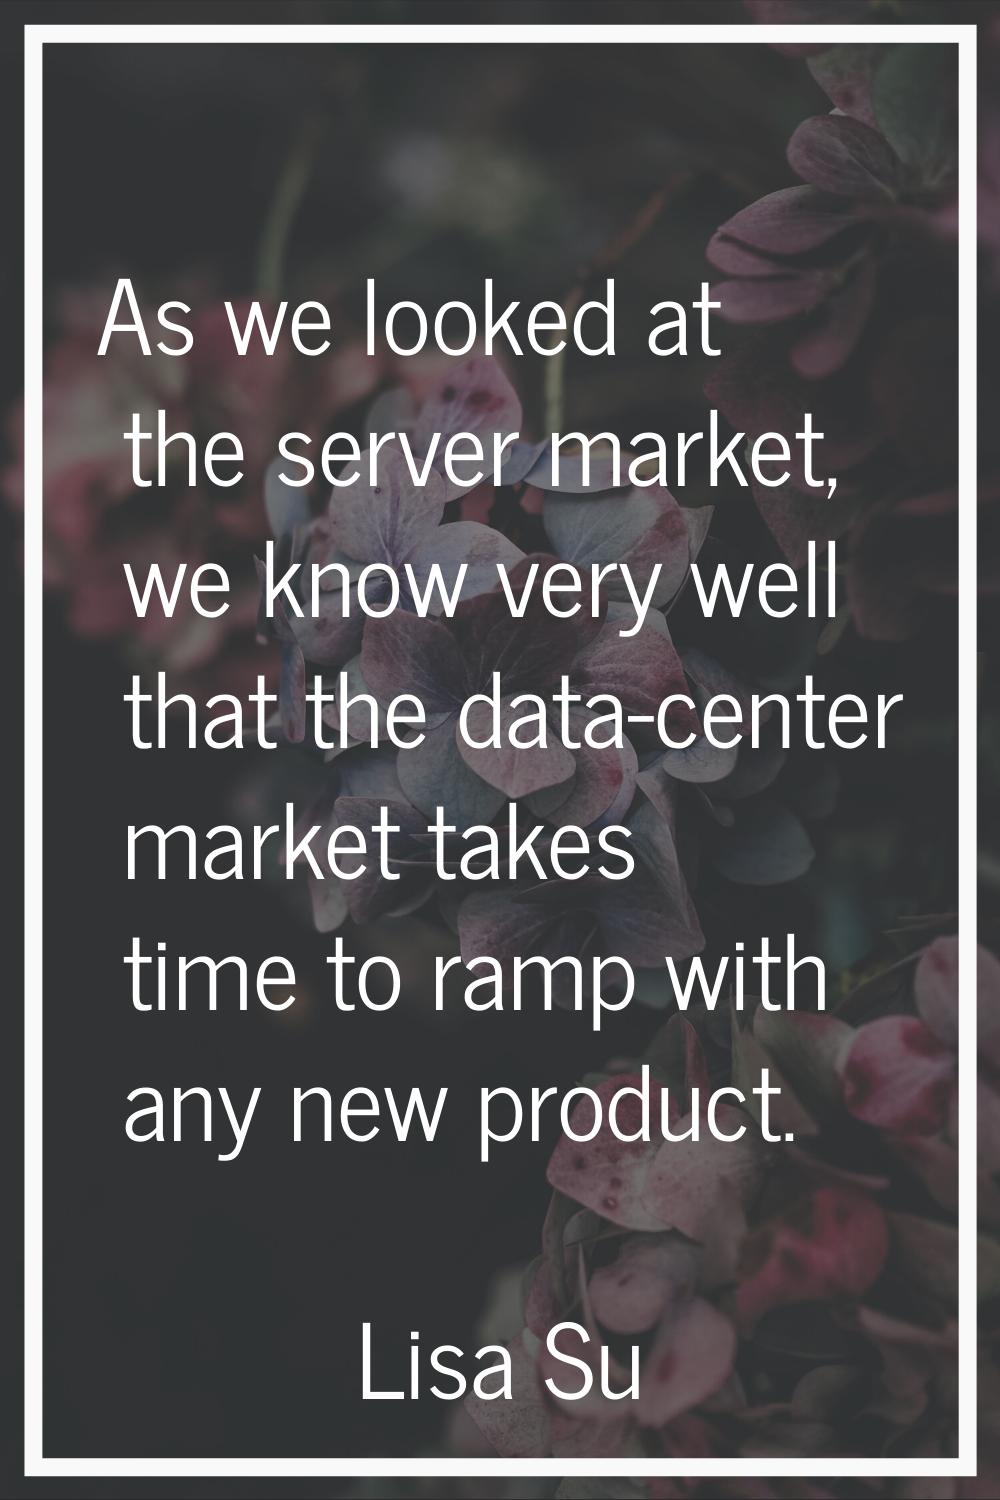 As we looked at the server market, we know very well that the data-center market takes time to ramp